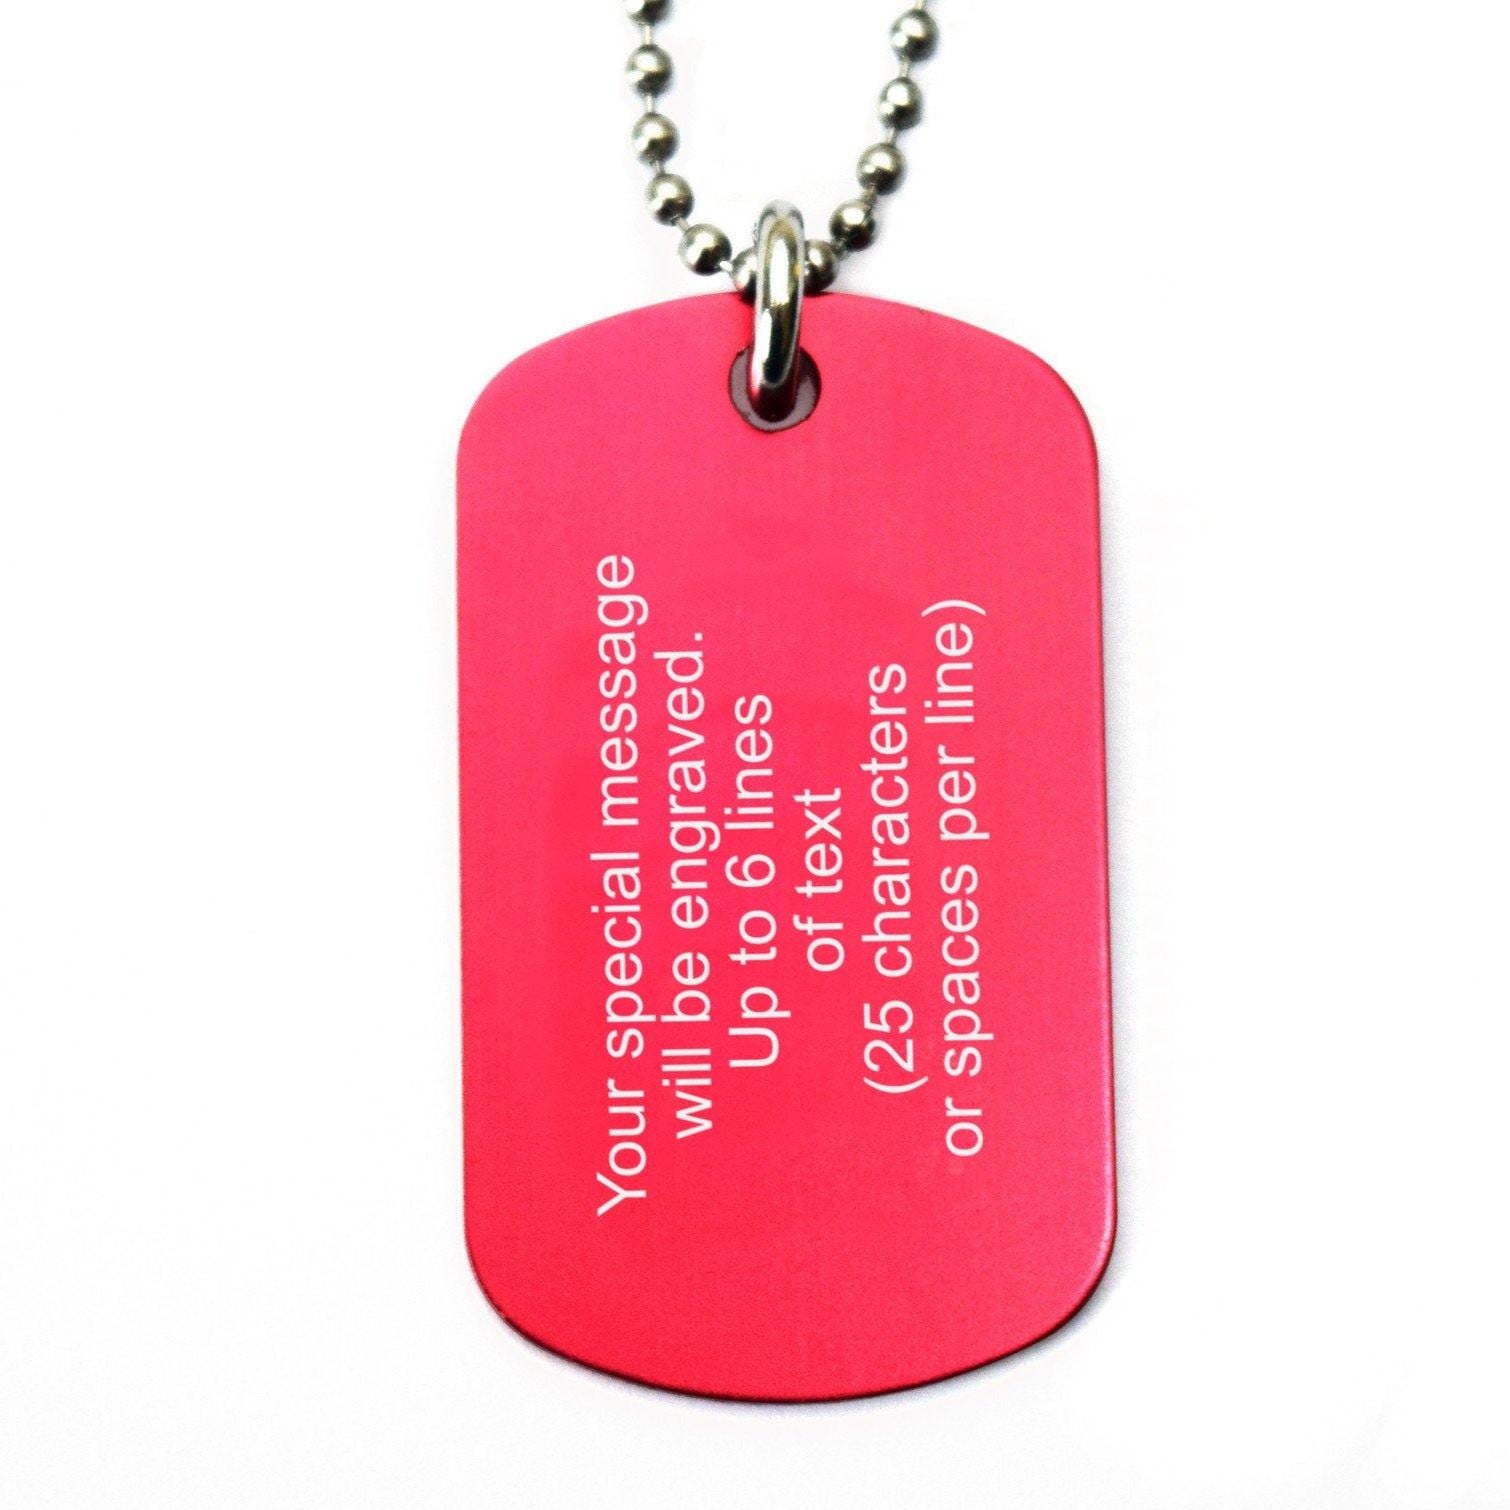 Red Dog Tag Necklace - custom engraved personalised